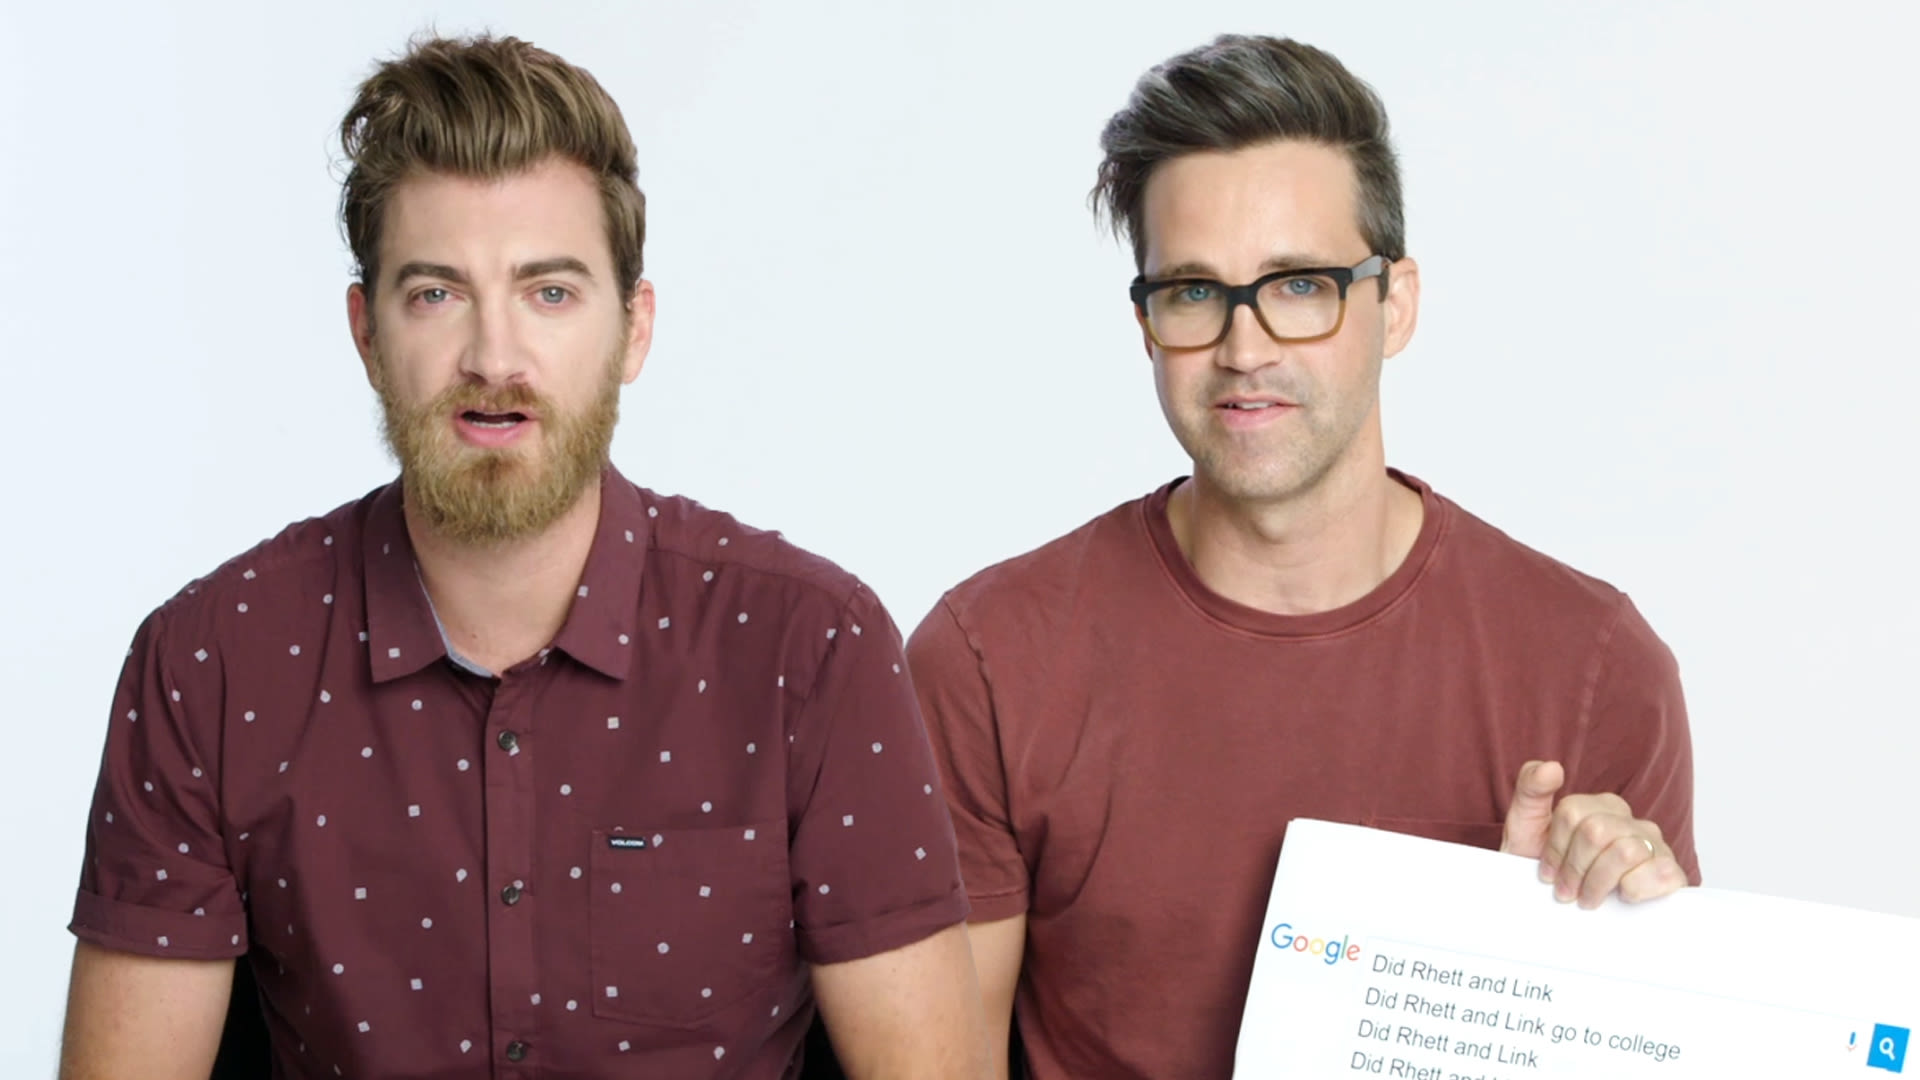 angela oehmke recommends rhett and link wives pic